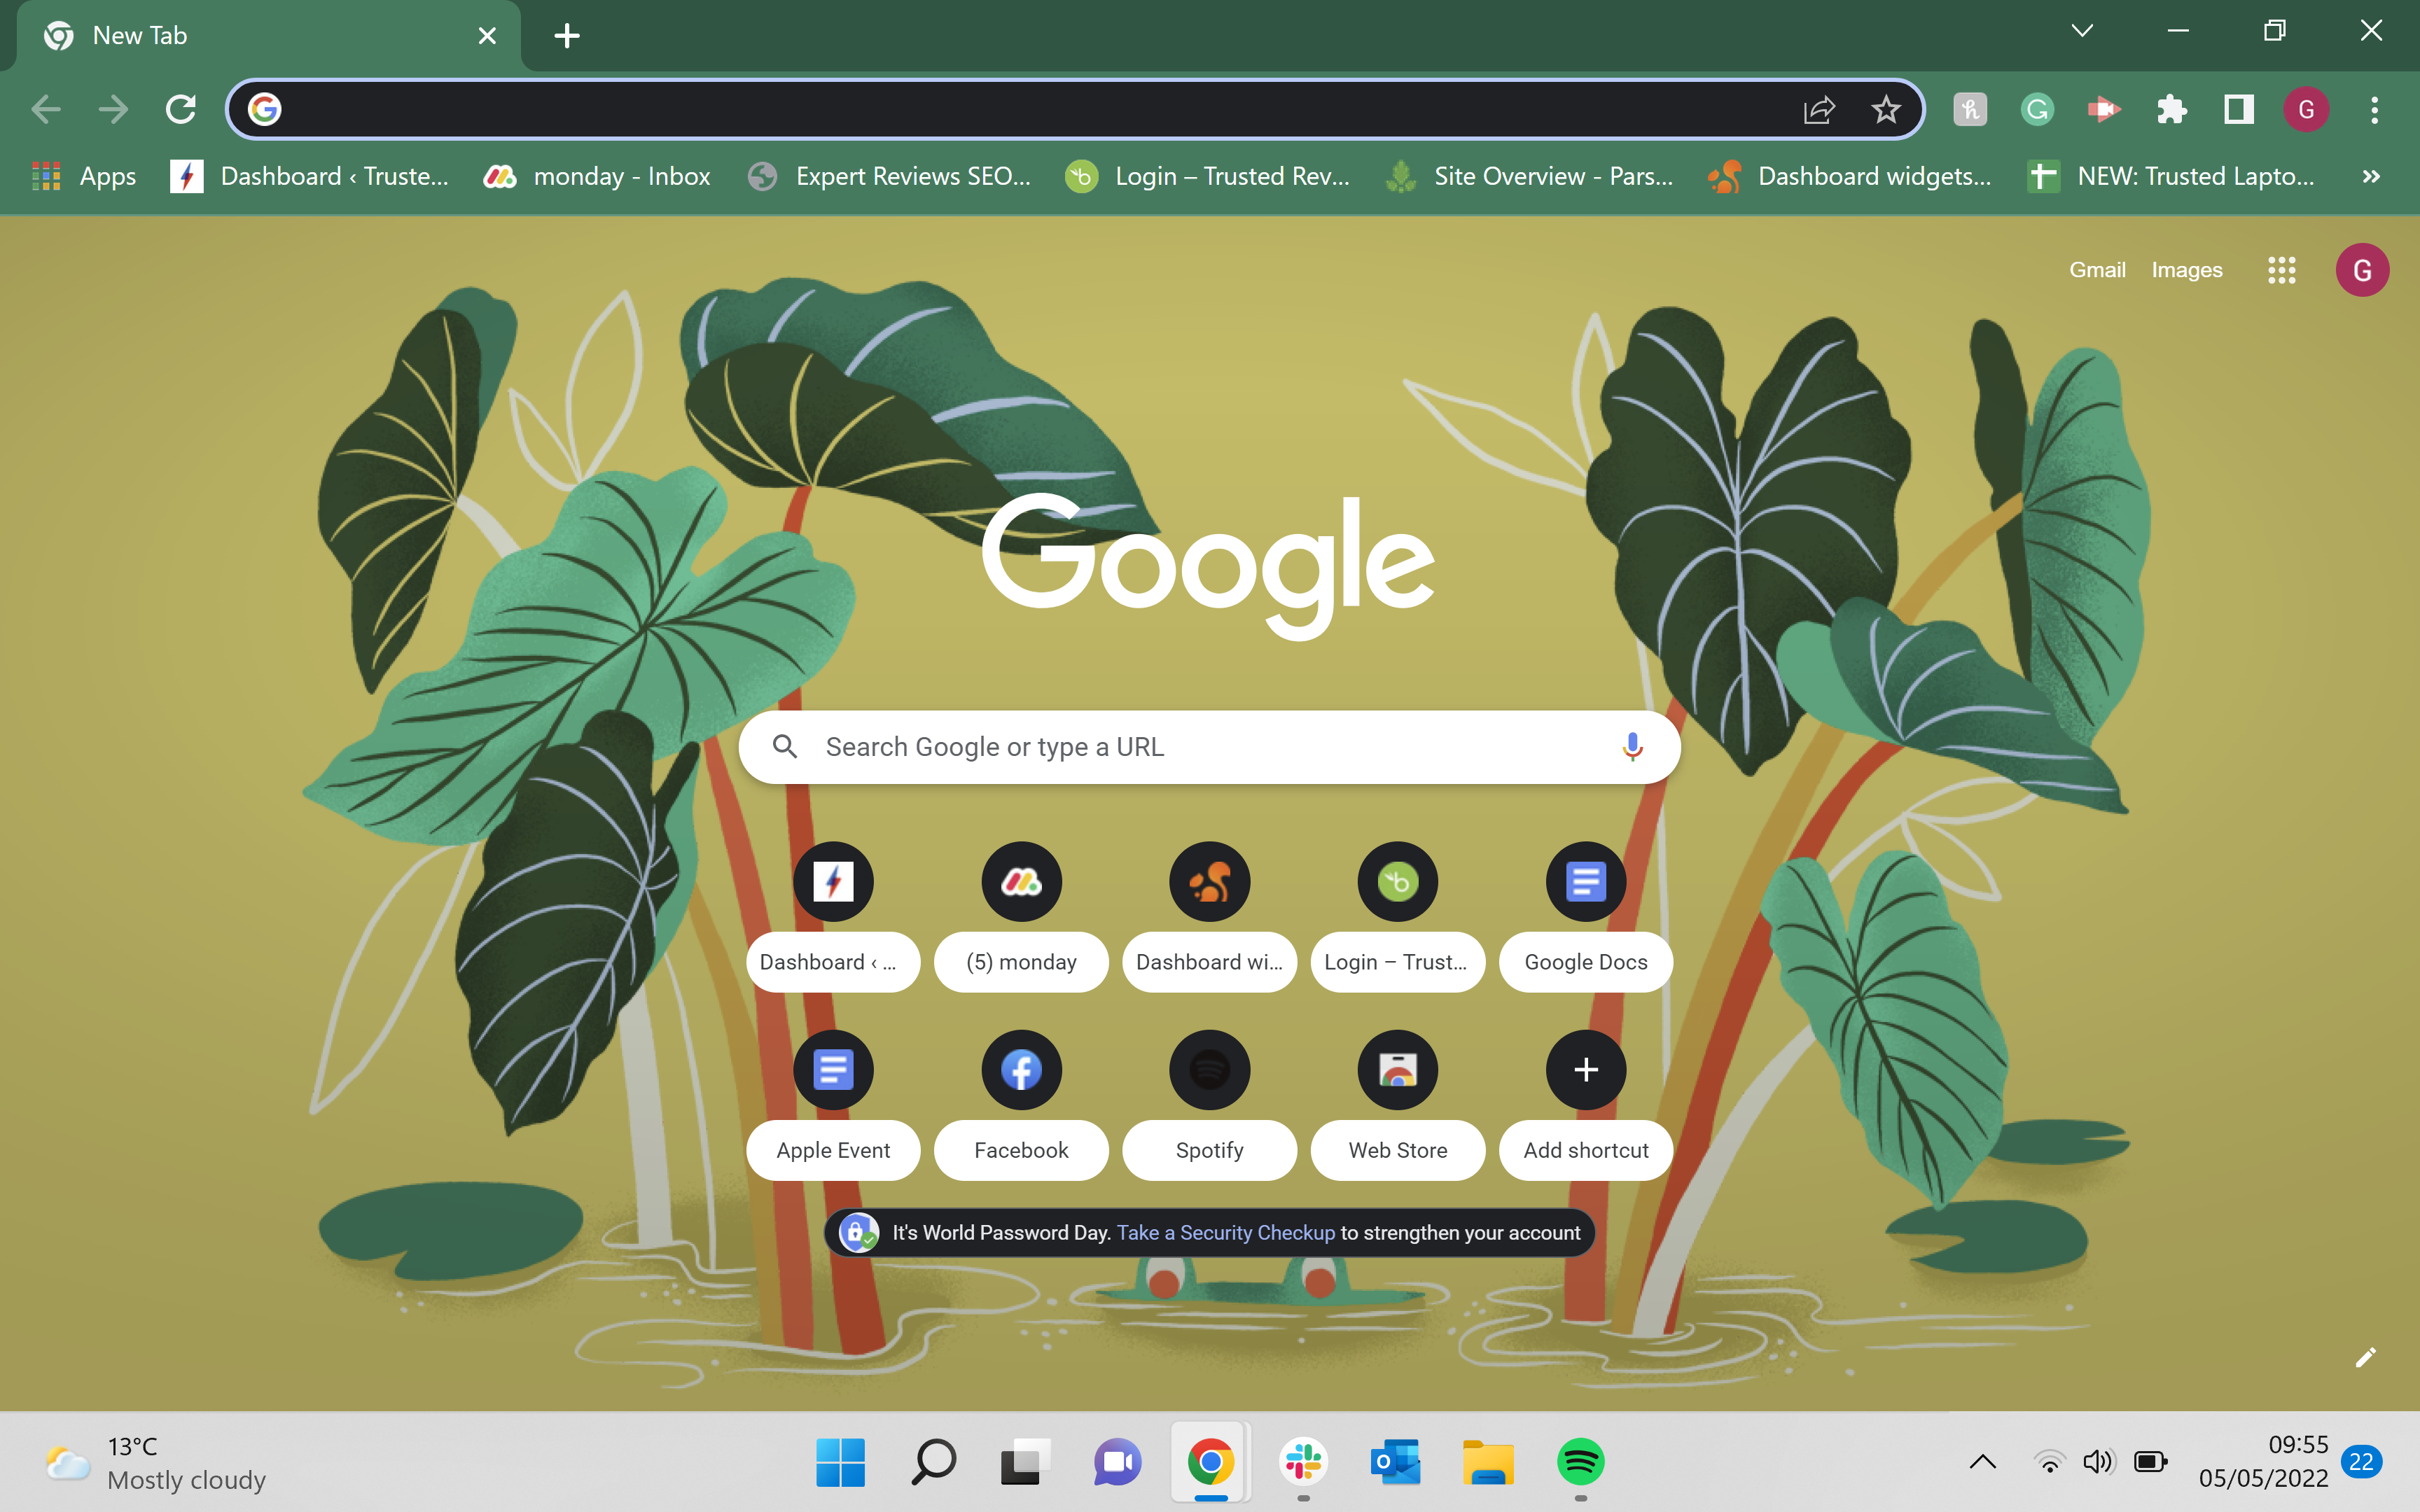 The Google Chrome home page in green